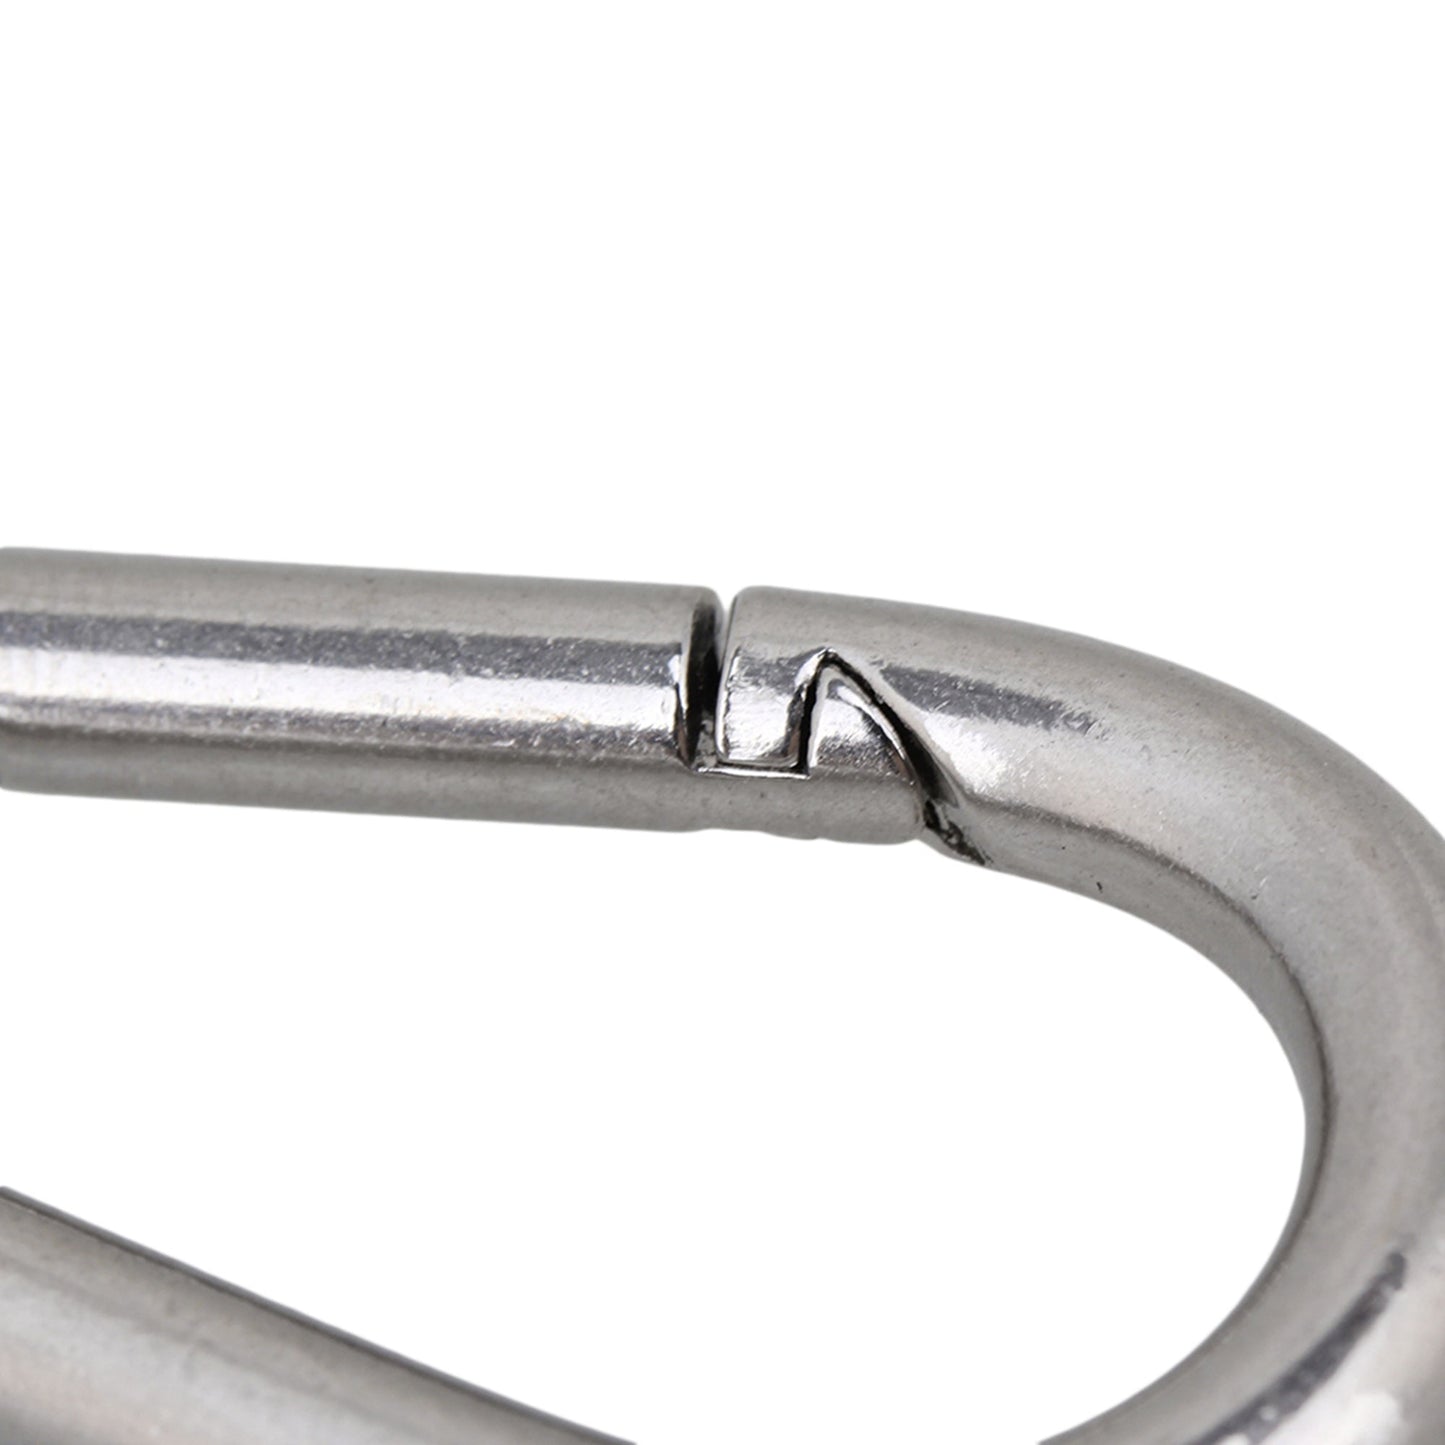 BQLZR 51.7x25x6.3mm Stainless Steel Spring Snap Hook for Wire Rope Link Pack of 100